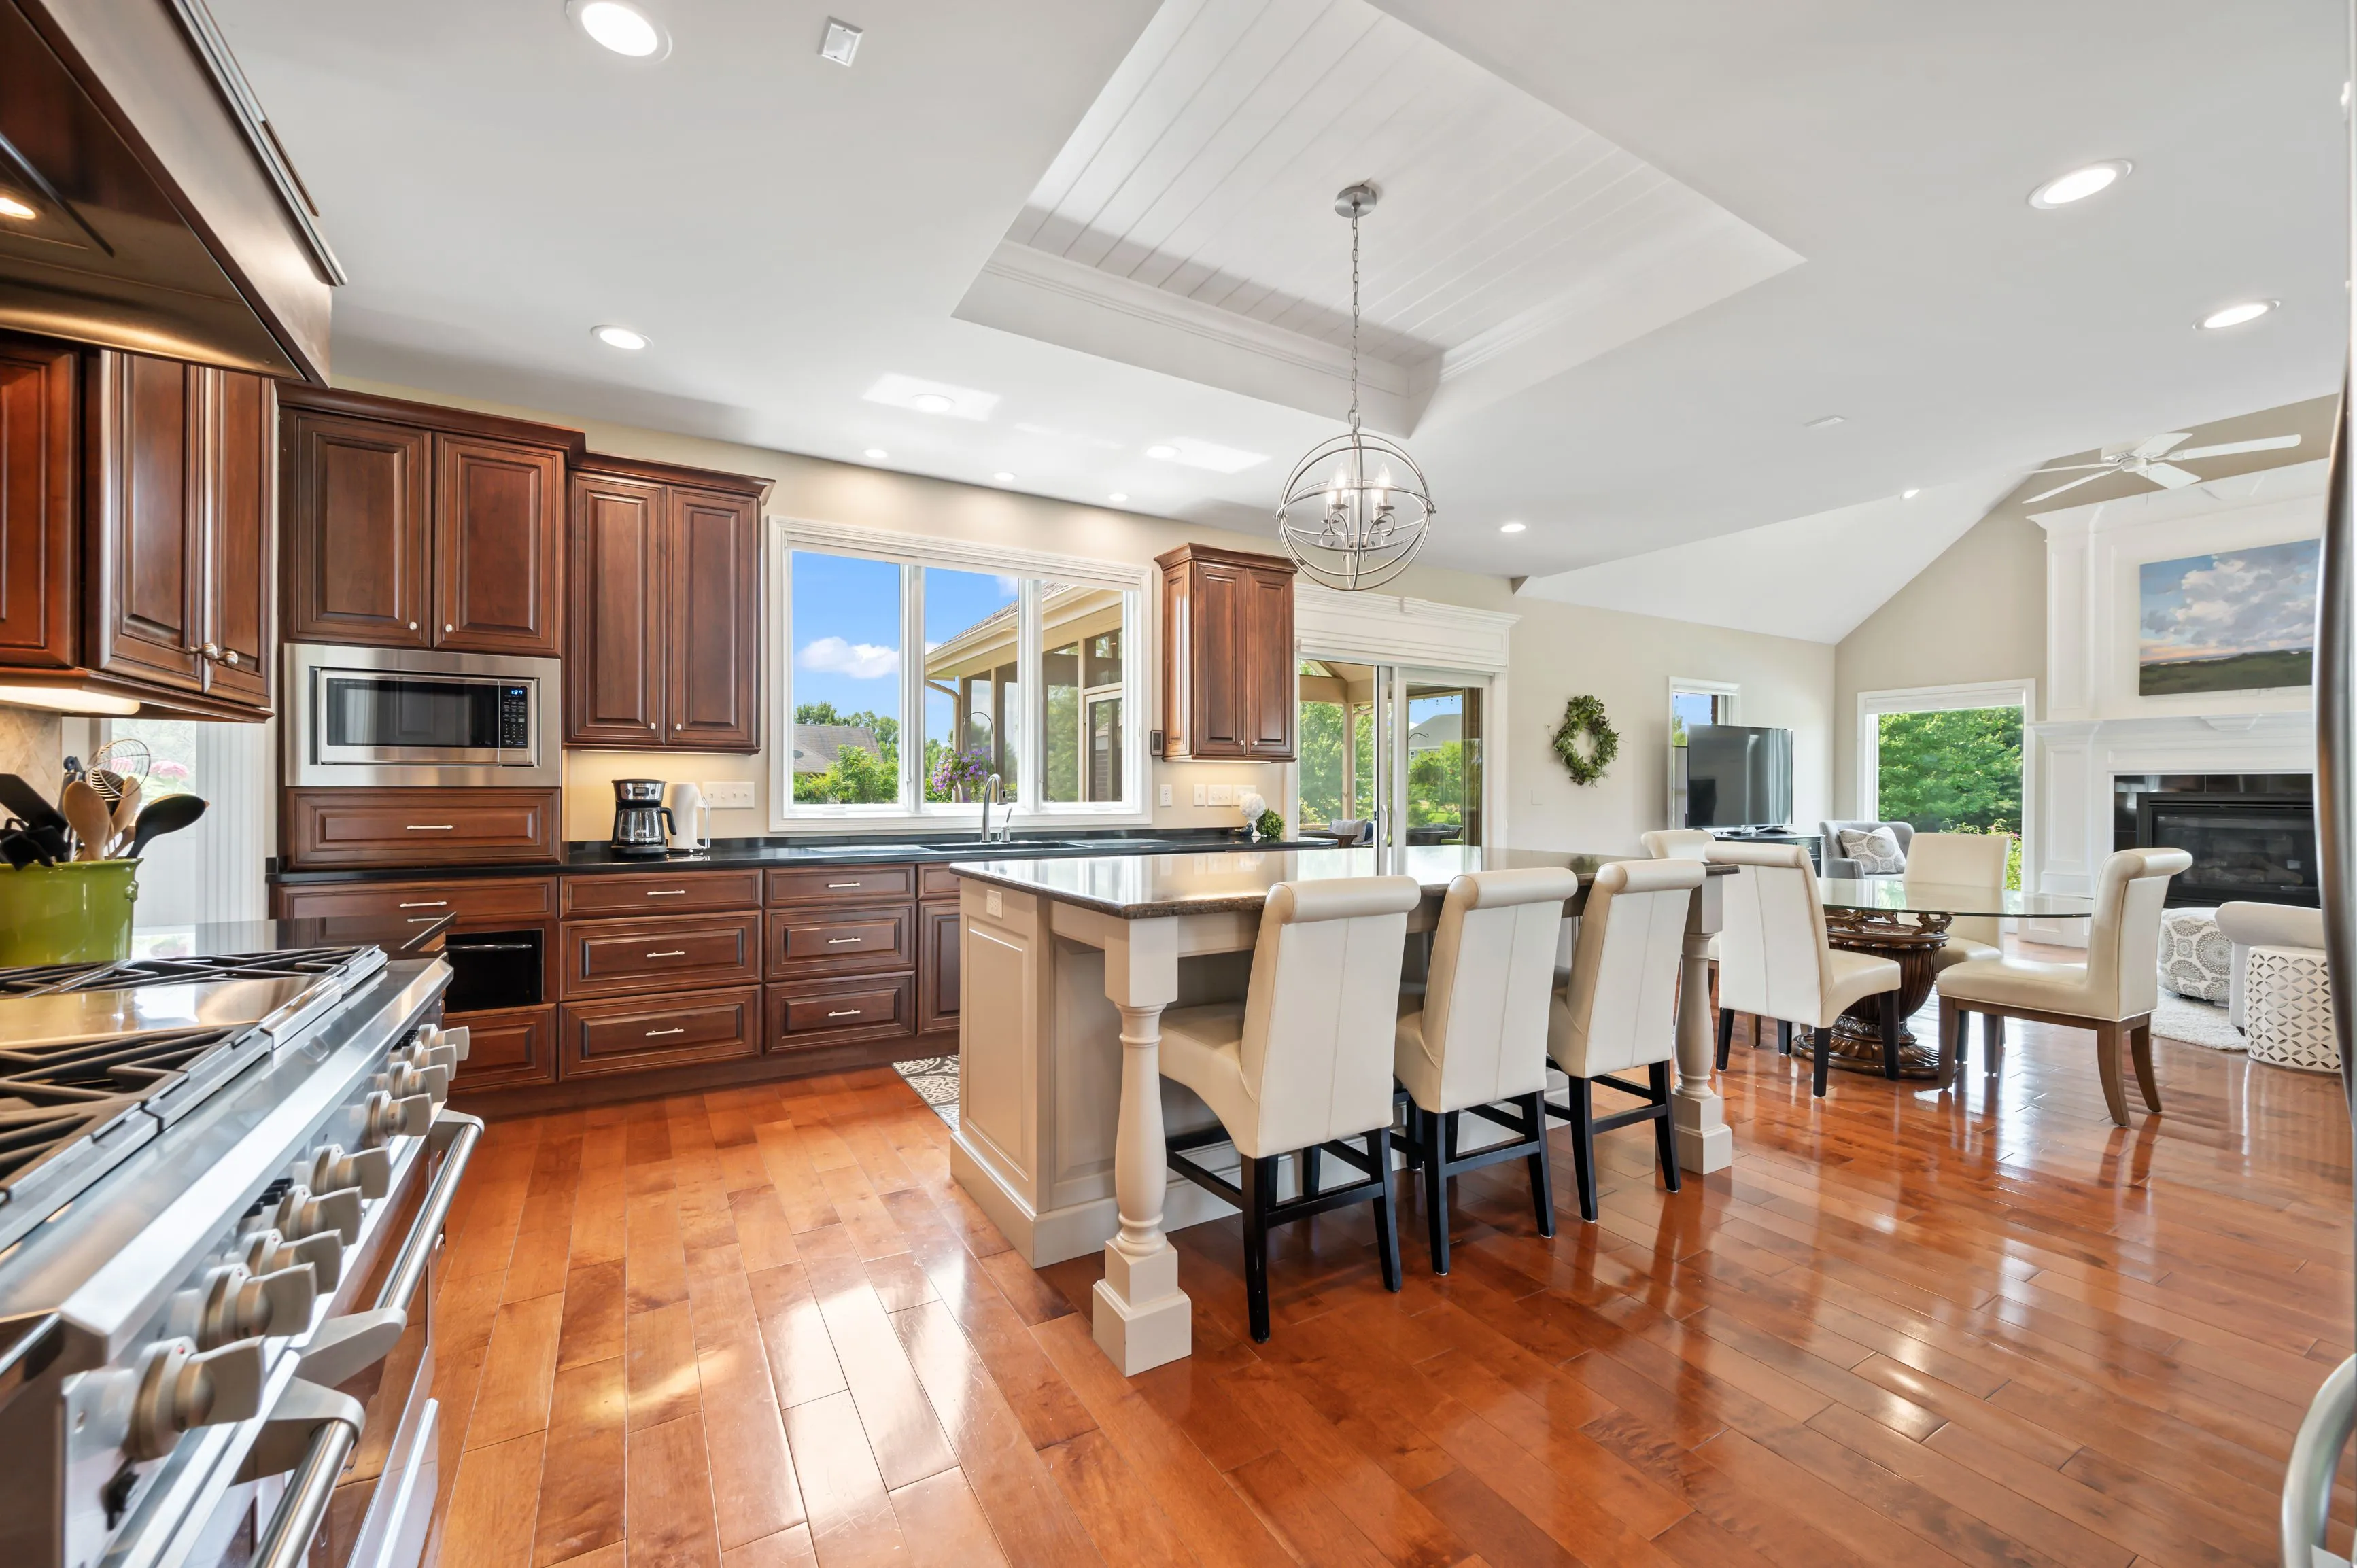 Spacious kitchen with rich wooden cabinetry, stainless steel appliances, a large island with bar stools, and a dining area in the background.